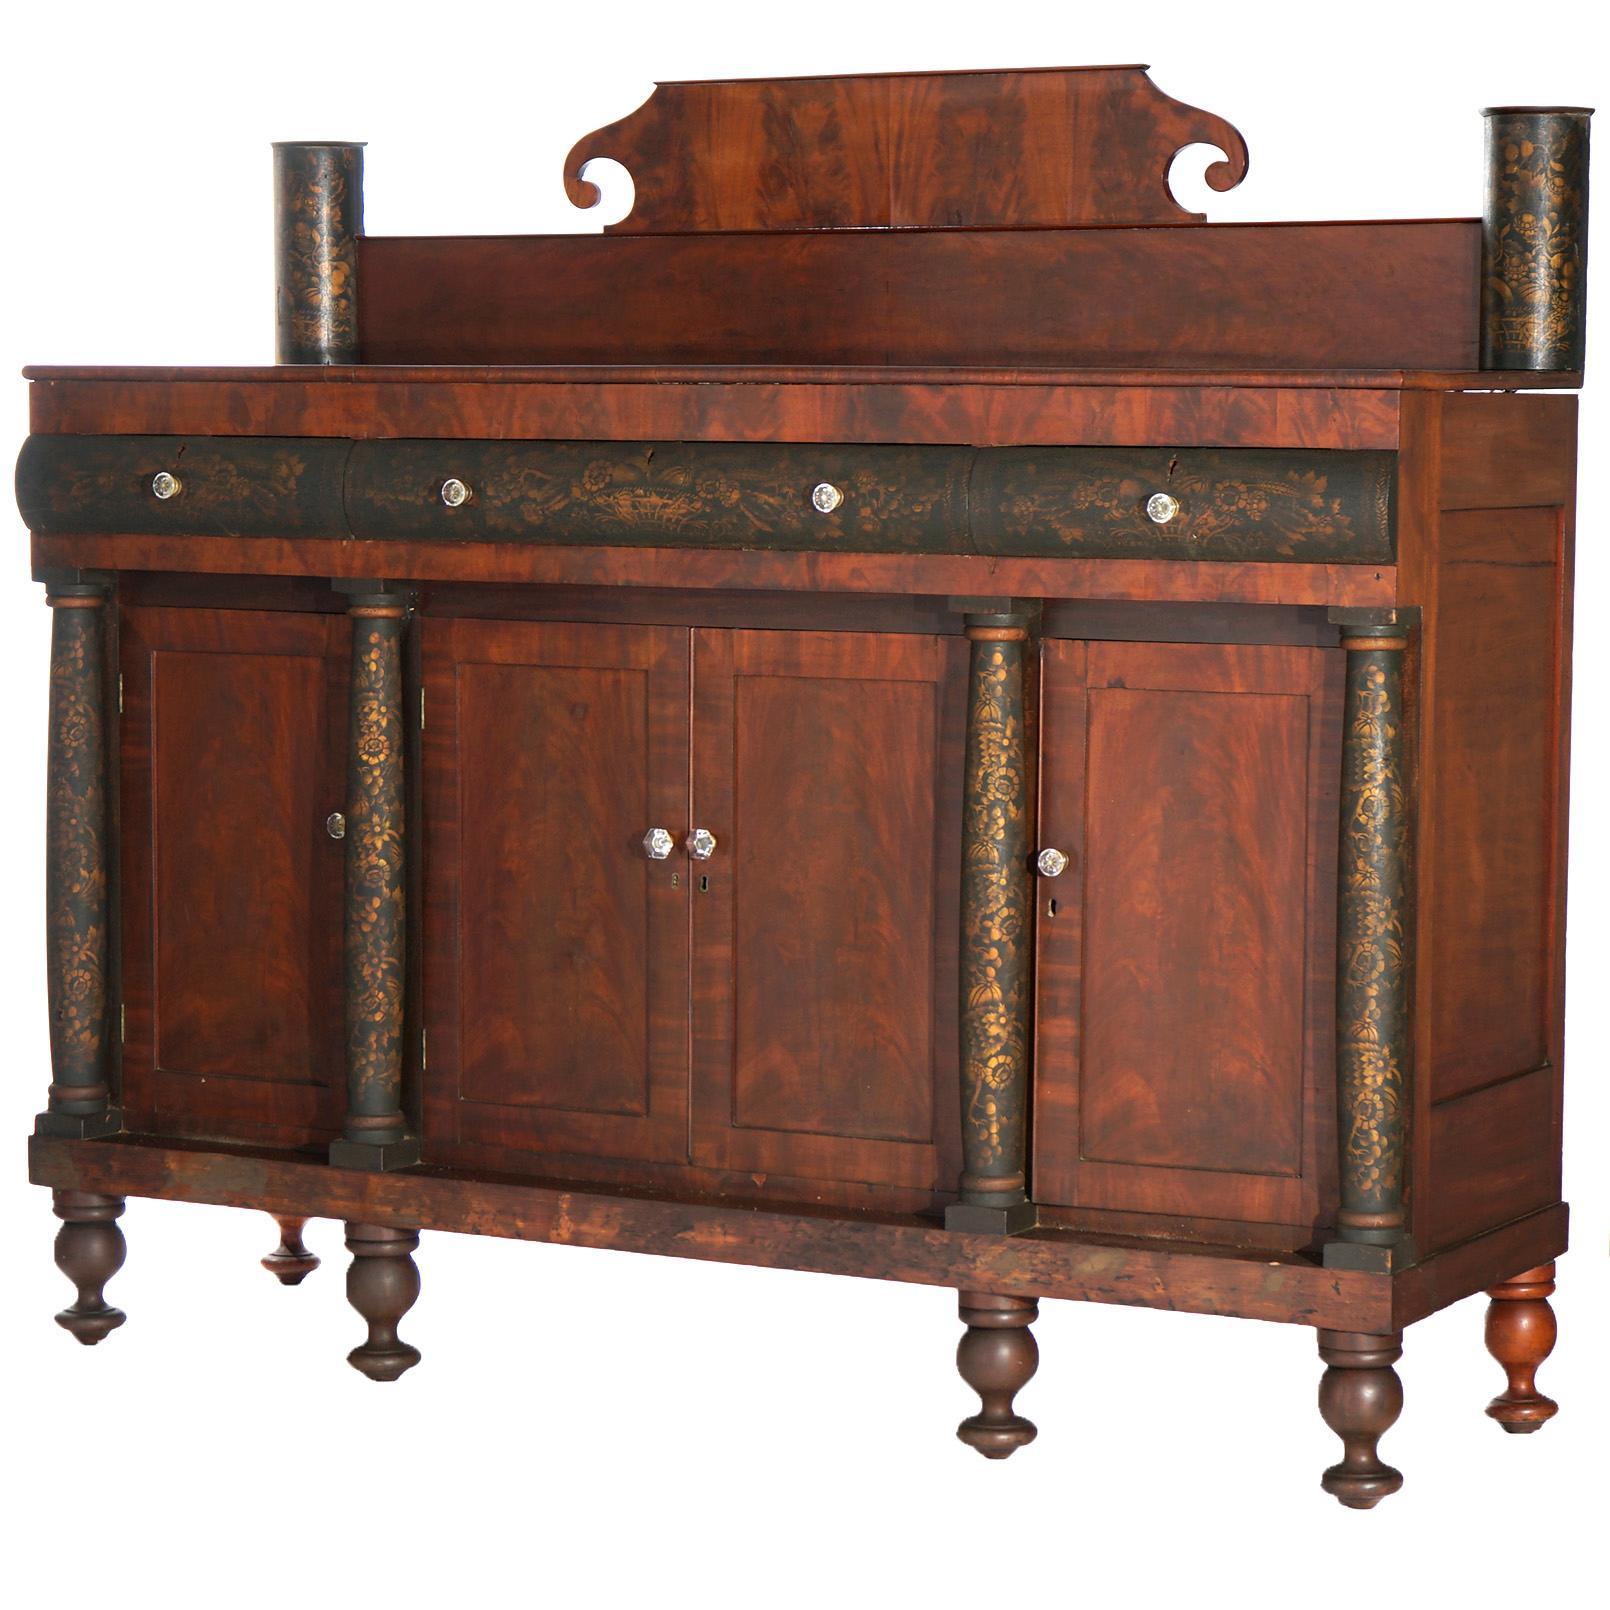 Painted Antique American Empire Neoclassical Ebonized & Stenciled Sideboard, Circa 1840